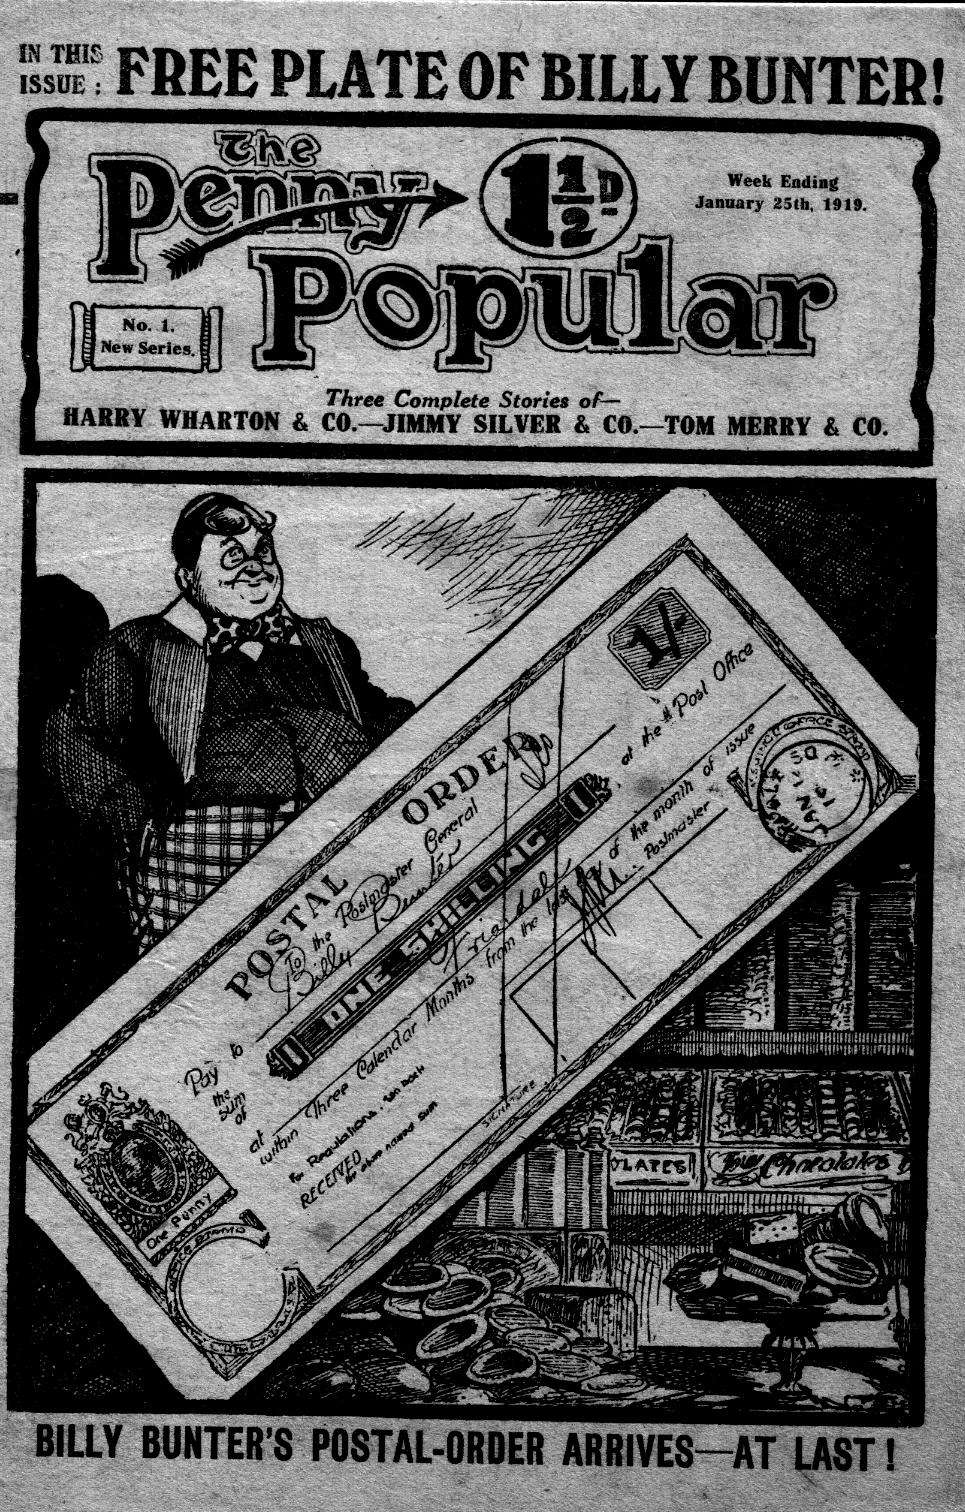 Comic Book Cover For The Popular 1 - Billy Bunter's Postal-Order!